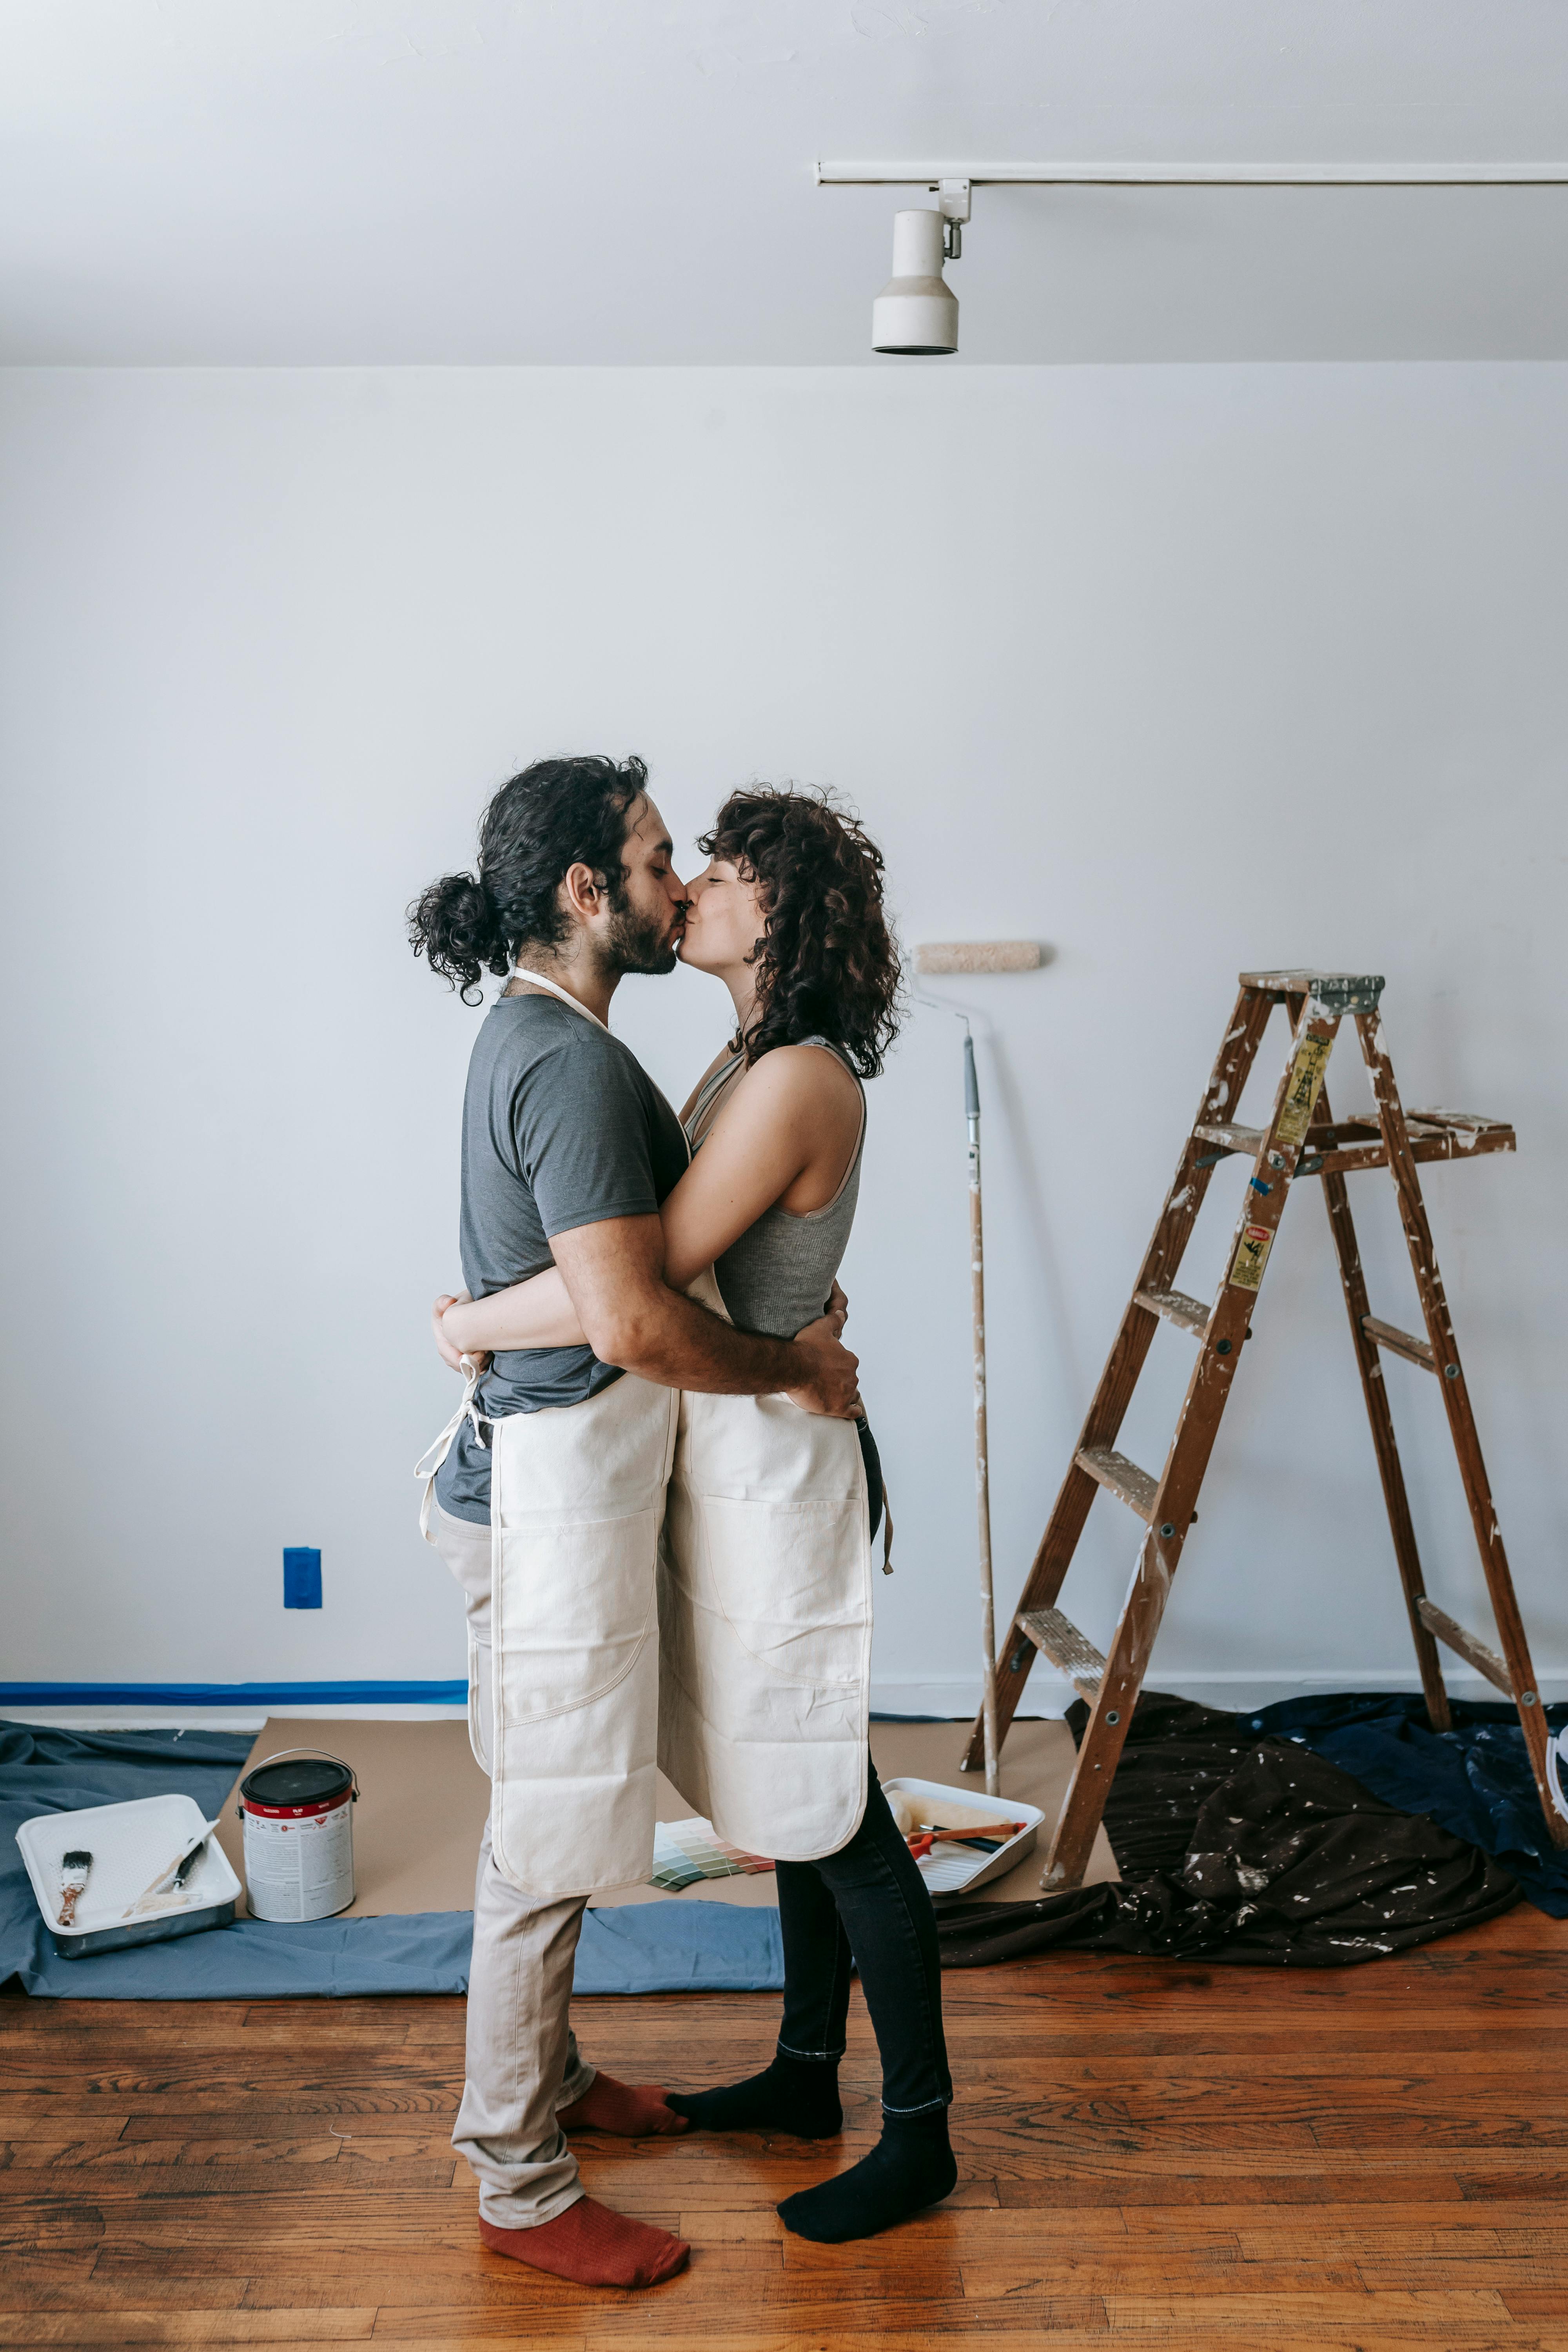 Couple Kissing While Having A Break At Work